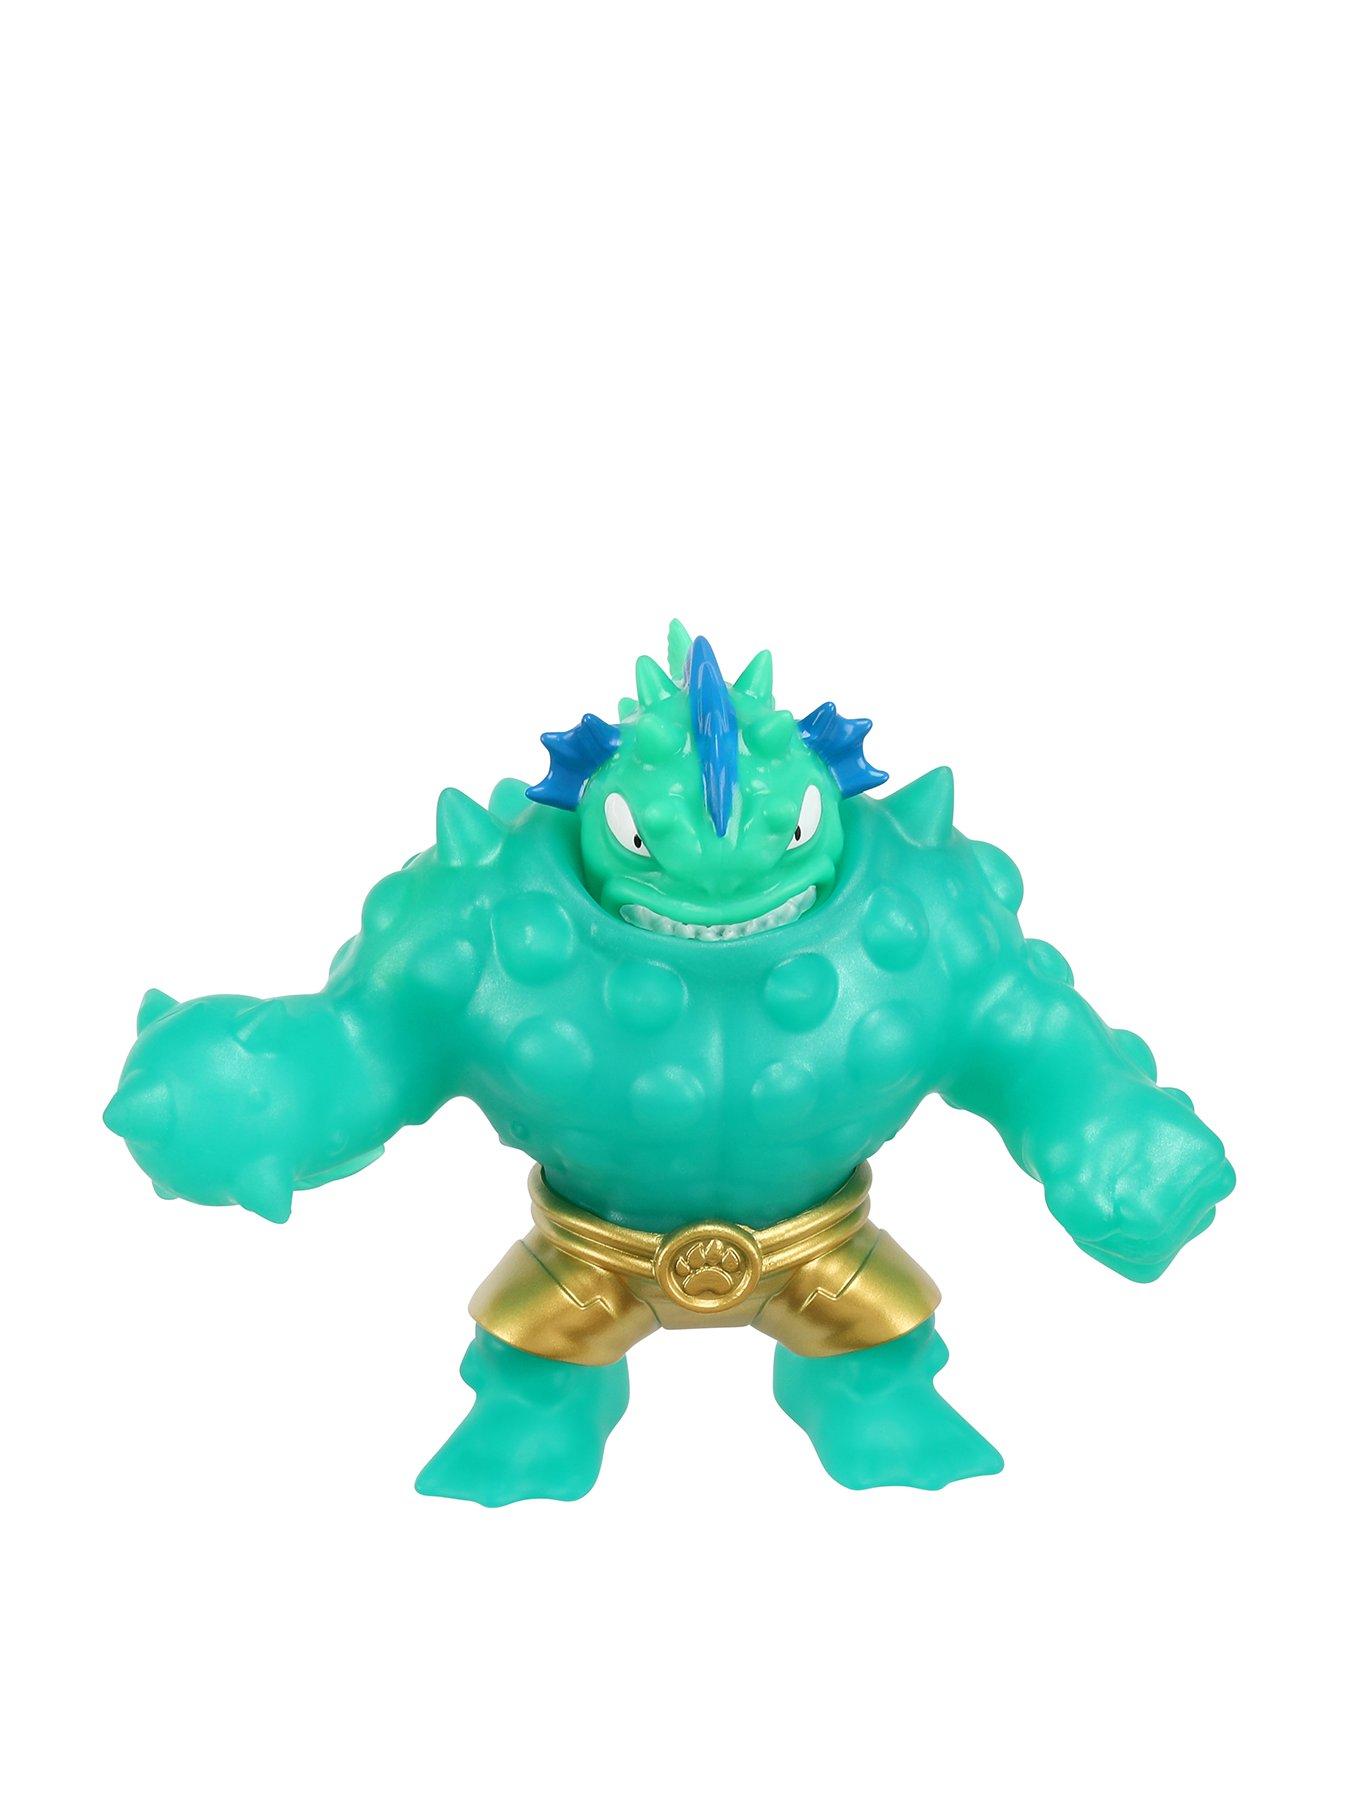 Heroes of Goo Jit Zu Deep Goo Sea King Hydra Figure with Triple Attack 3 in  1 Goo Power. Plus Light and Sound Battle Action!